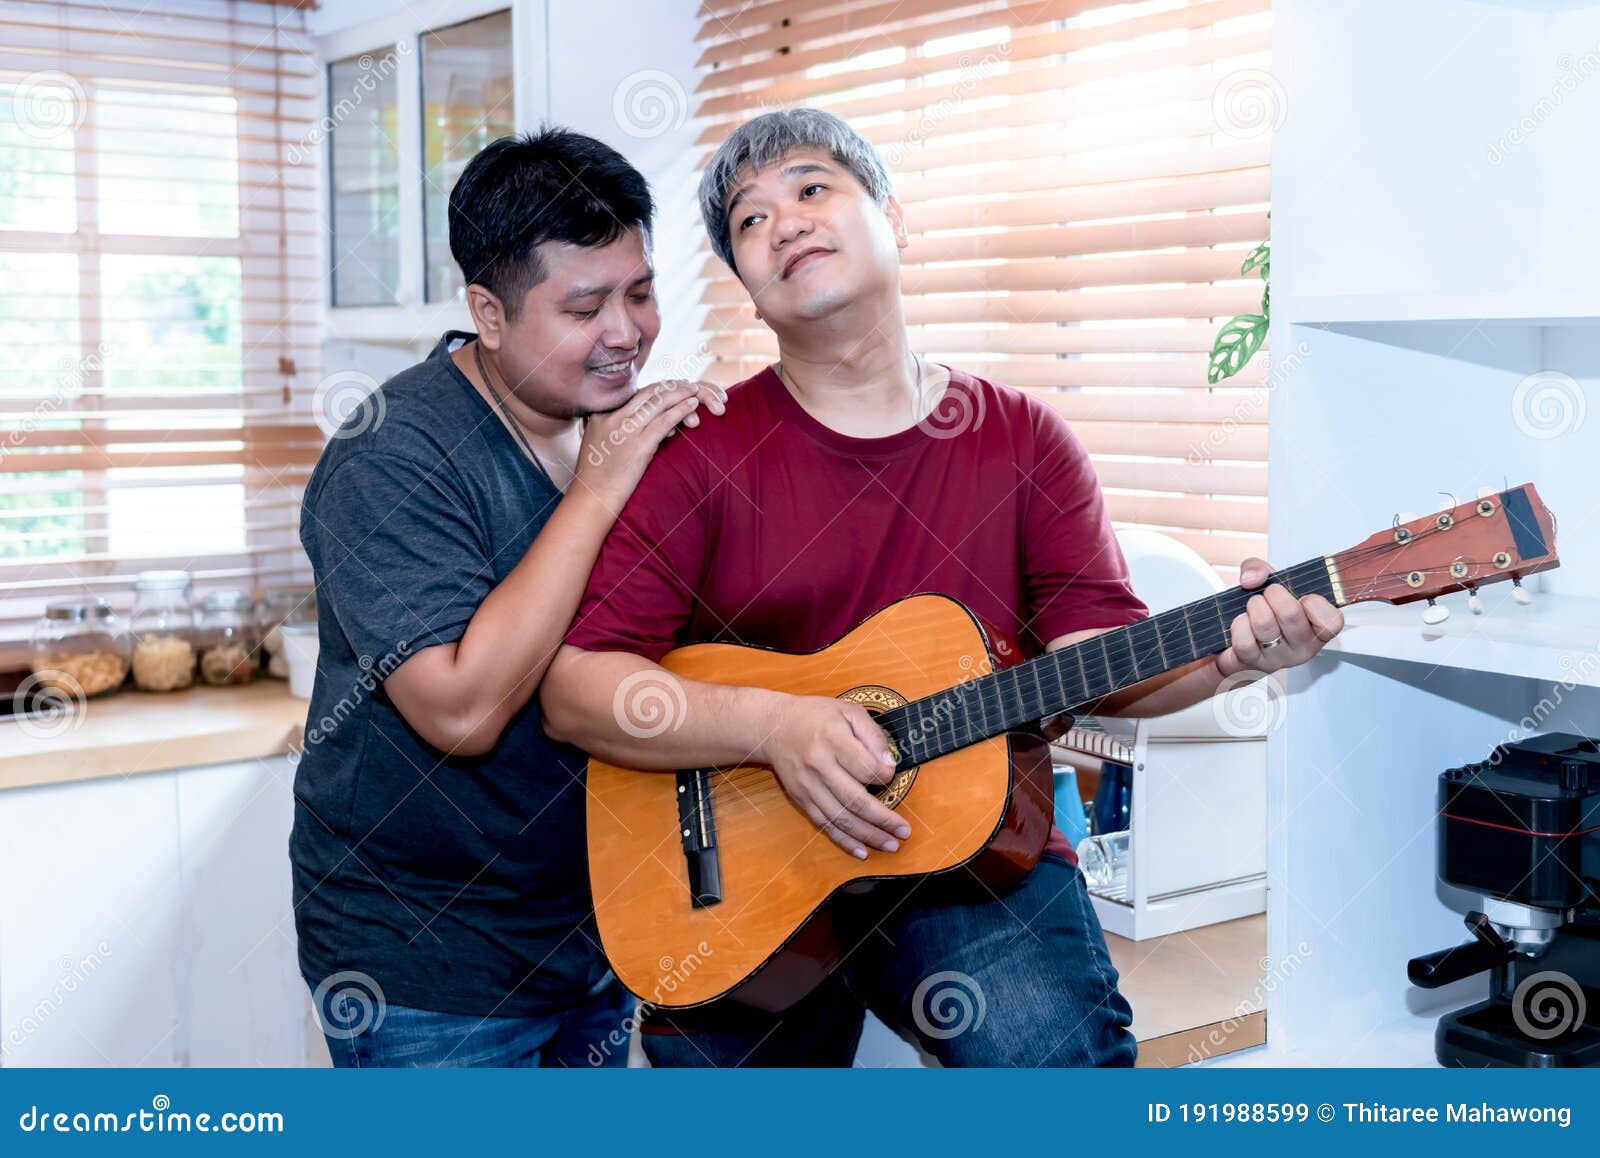 Alternative Sex Couples or LGBT Asian Man, are Currently Enjoying Activities Stock Image photo photo